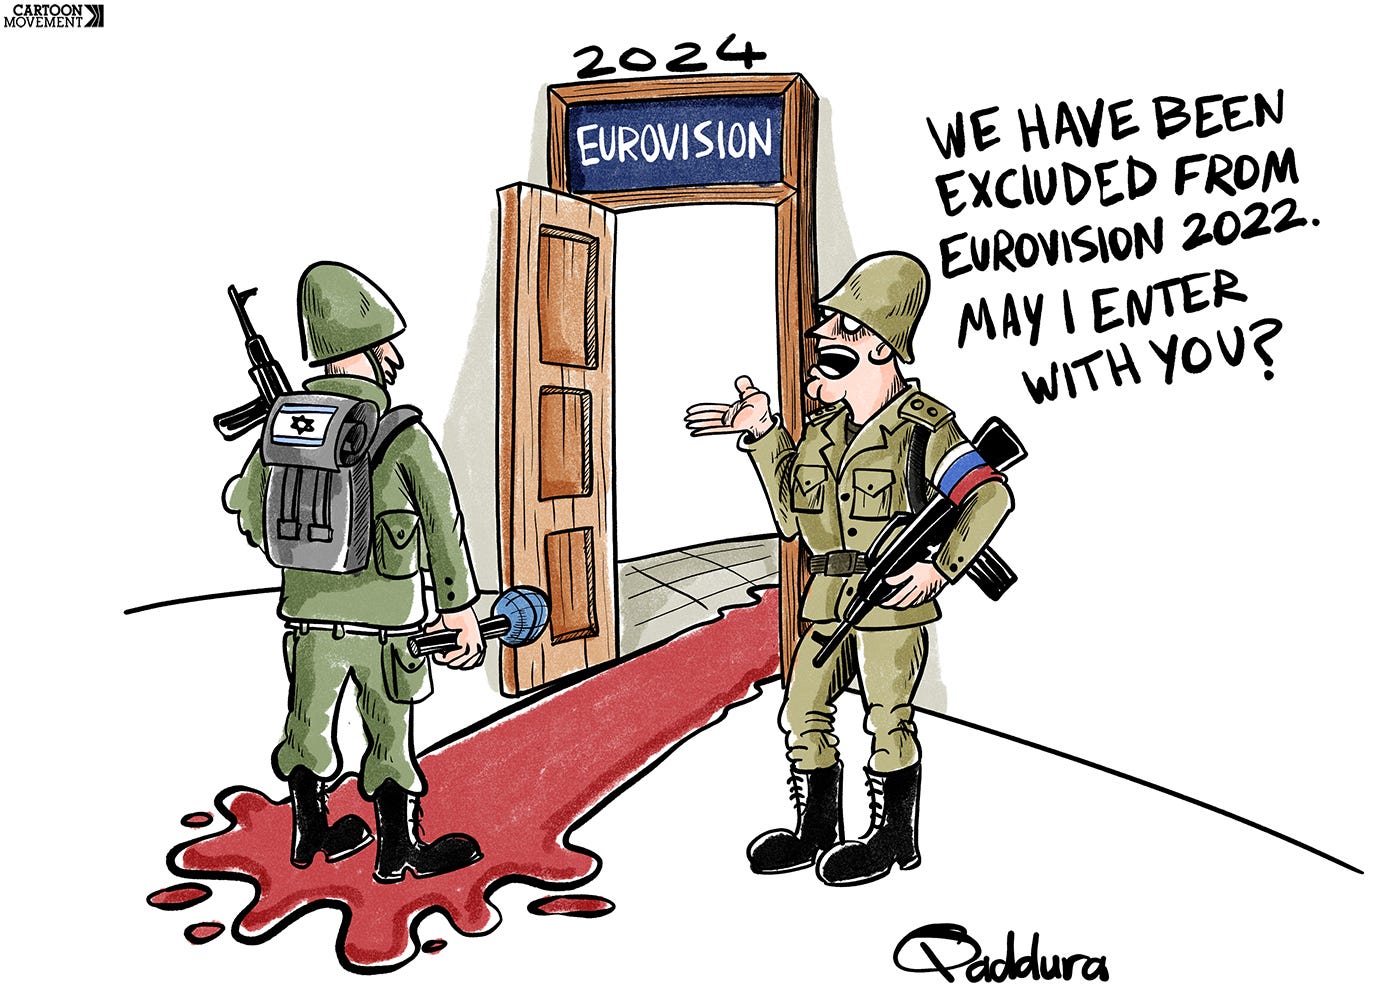 Cartoon showing a door with the sign "Eurovision 2024" above it. A red carpet, which is actually a puddle of blood, extends from the door. An  Israeli soldier  stands in the puddle of blood. A Russian solider stands to the side, saying: "We have been excluded from Eurovision 2022. May I enter with you?"